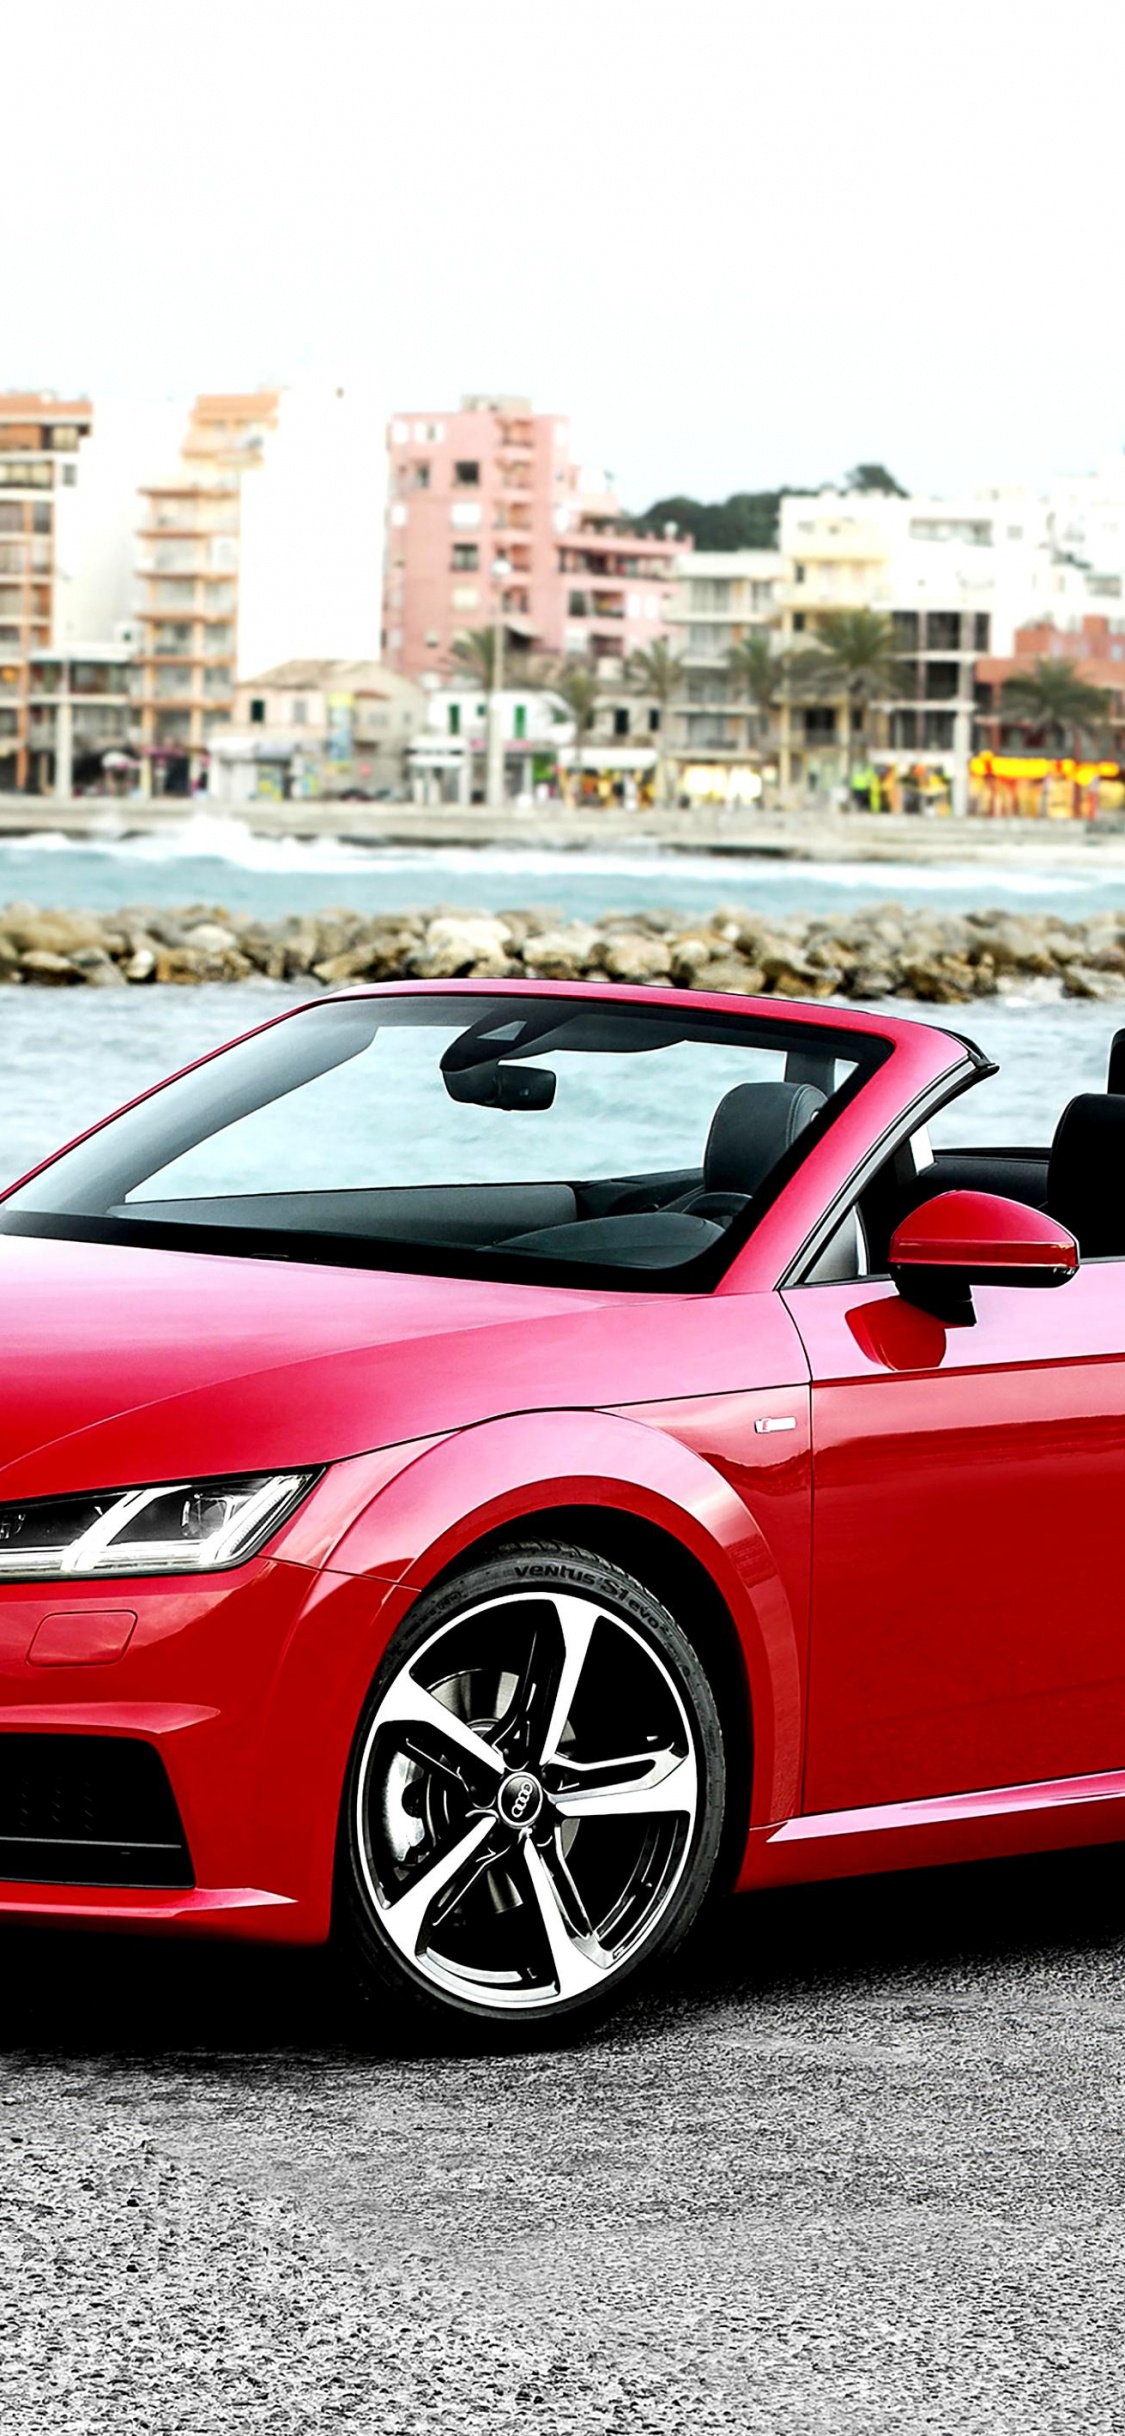 Red Convertible Car Parked Near Body of Water During Daytime. Wallpaper in 1125x2436 Resolution